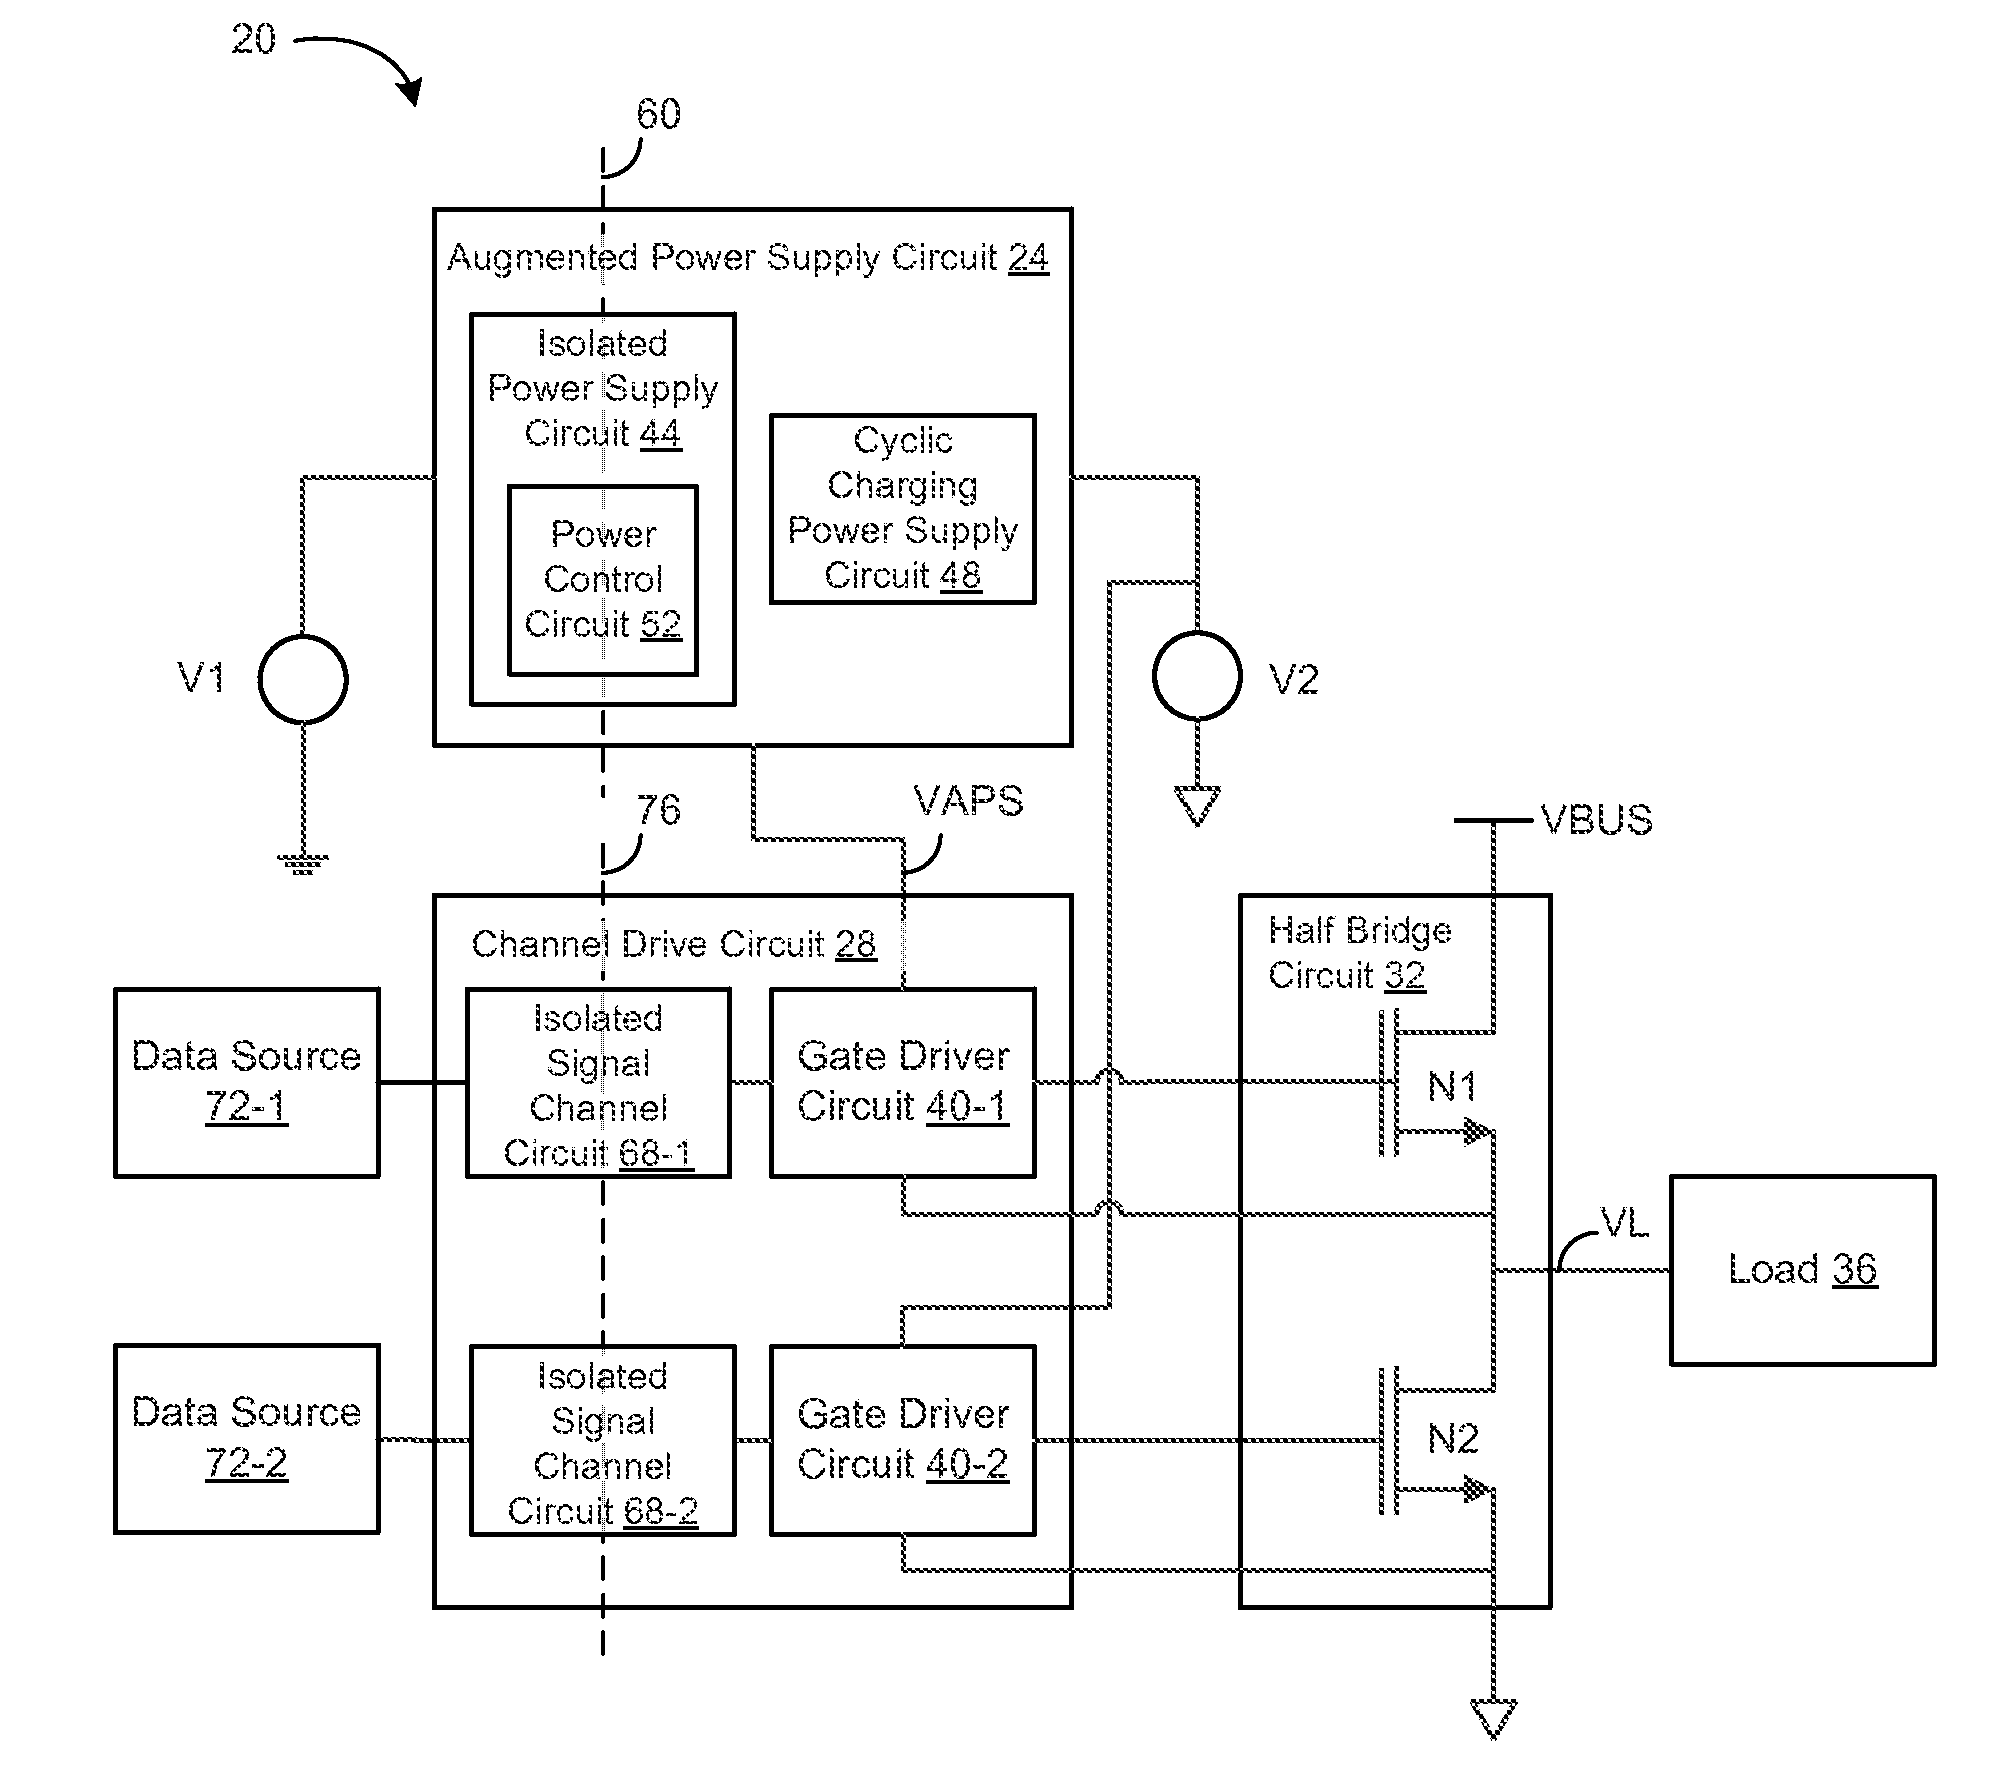 Power supply circuits for gate drivers